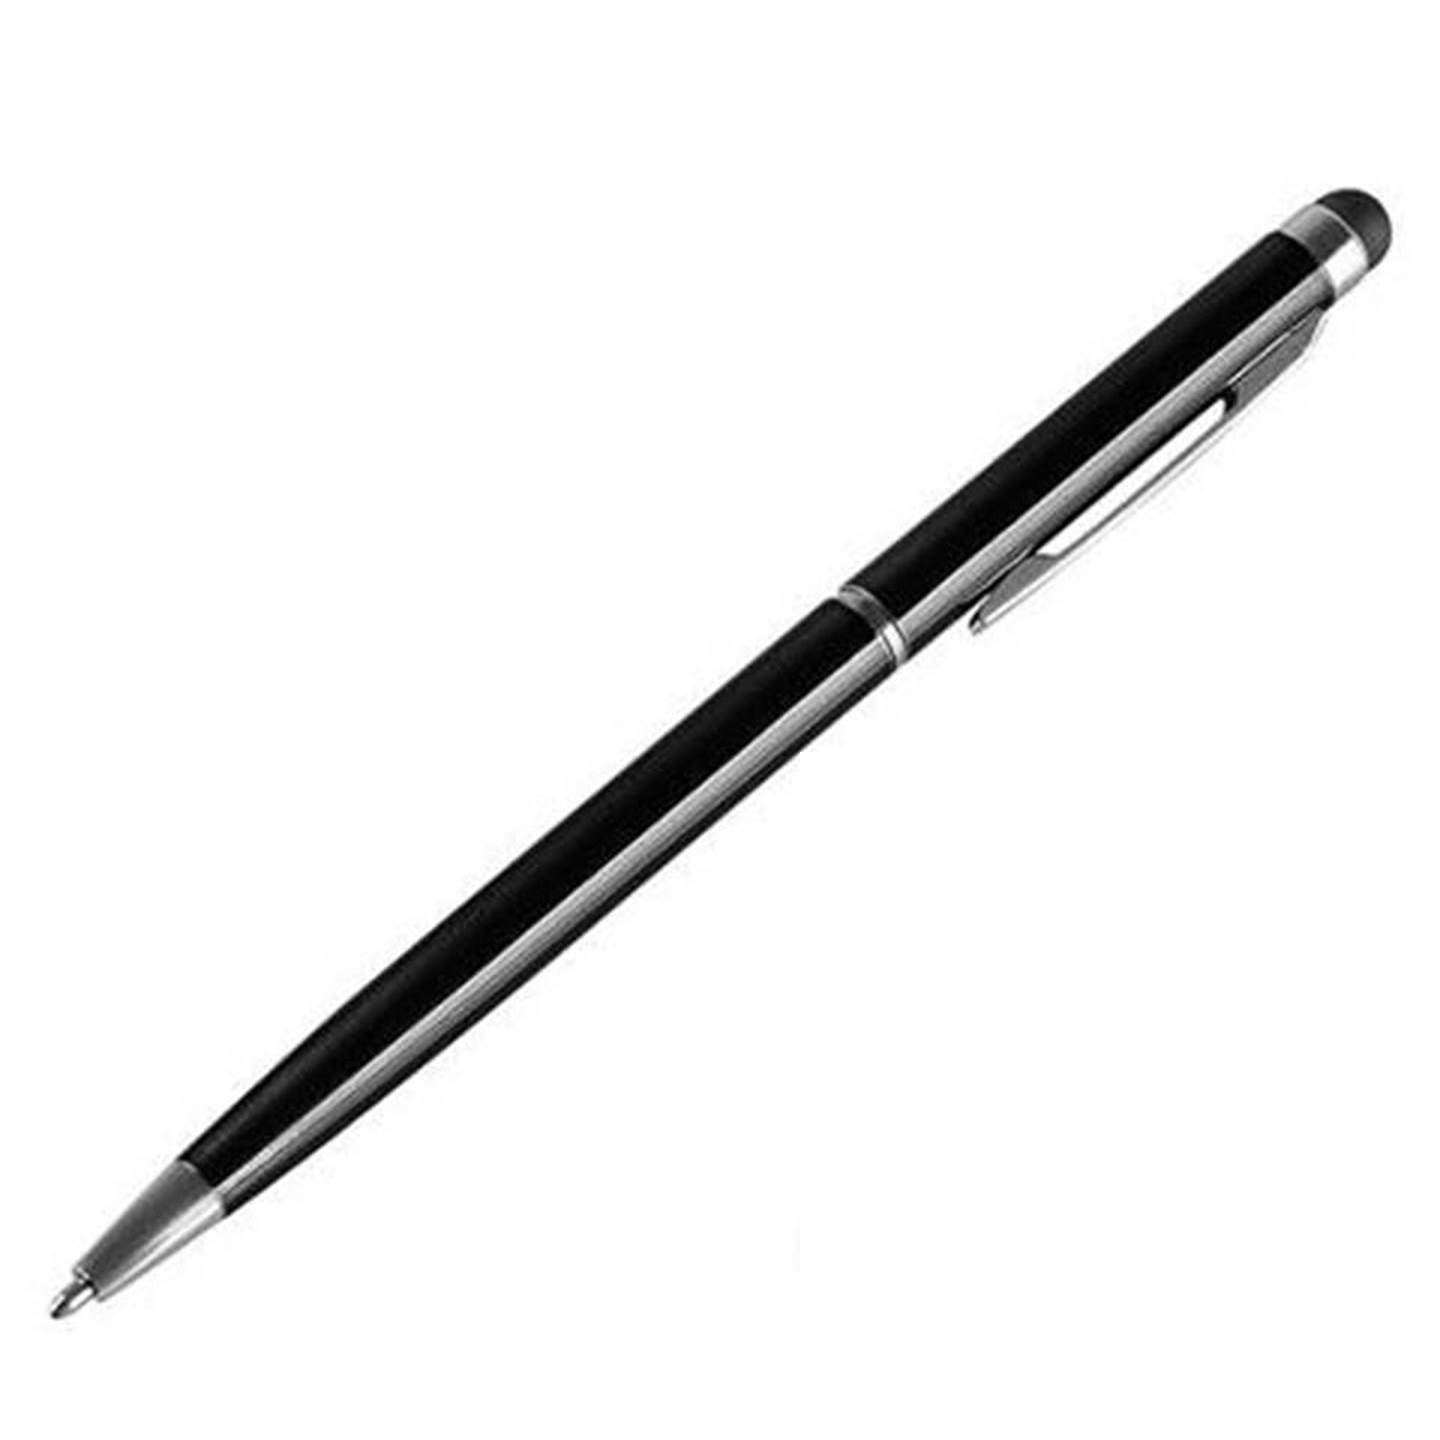 10 Black 2-in-1 Touch Screen Stylus Ballpoint Pen iPad iPhone Smartphone Tablet